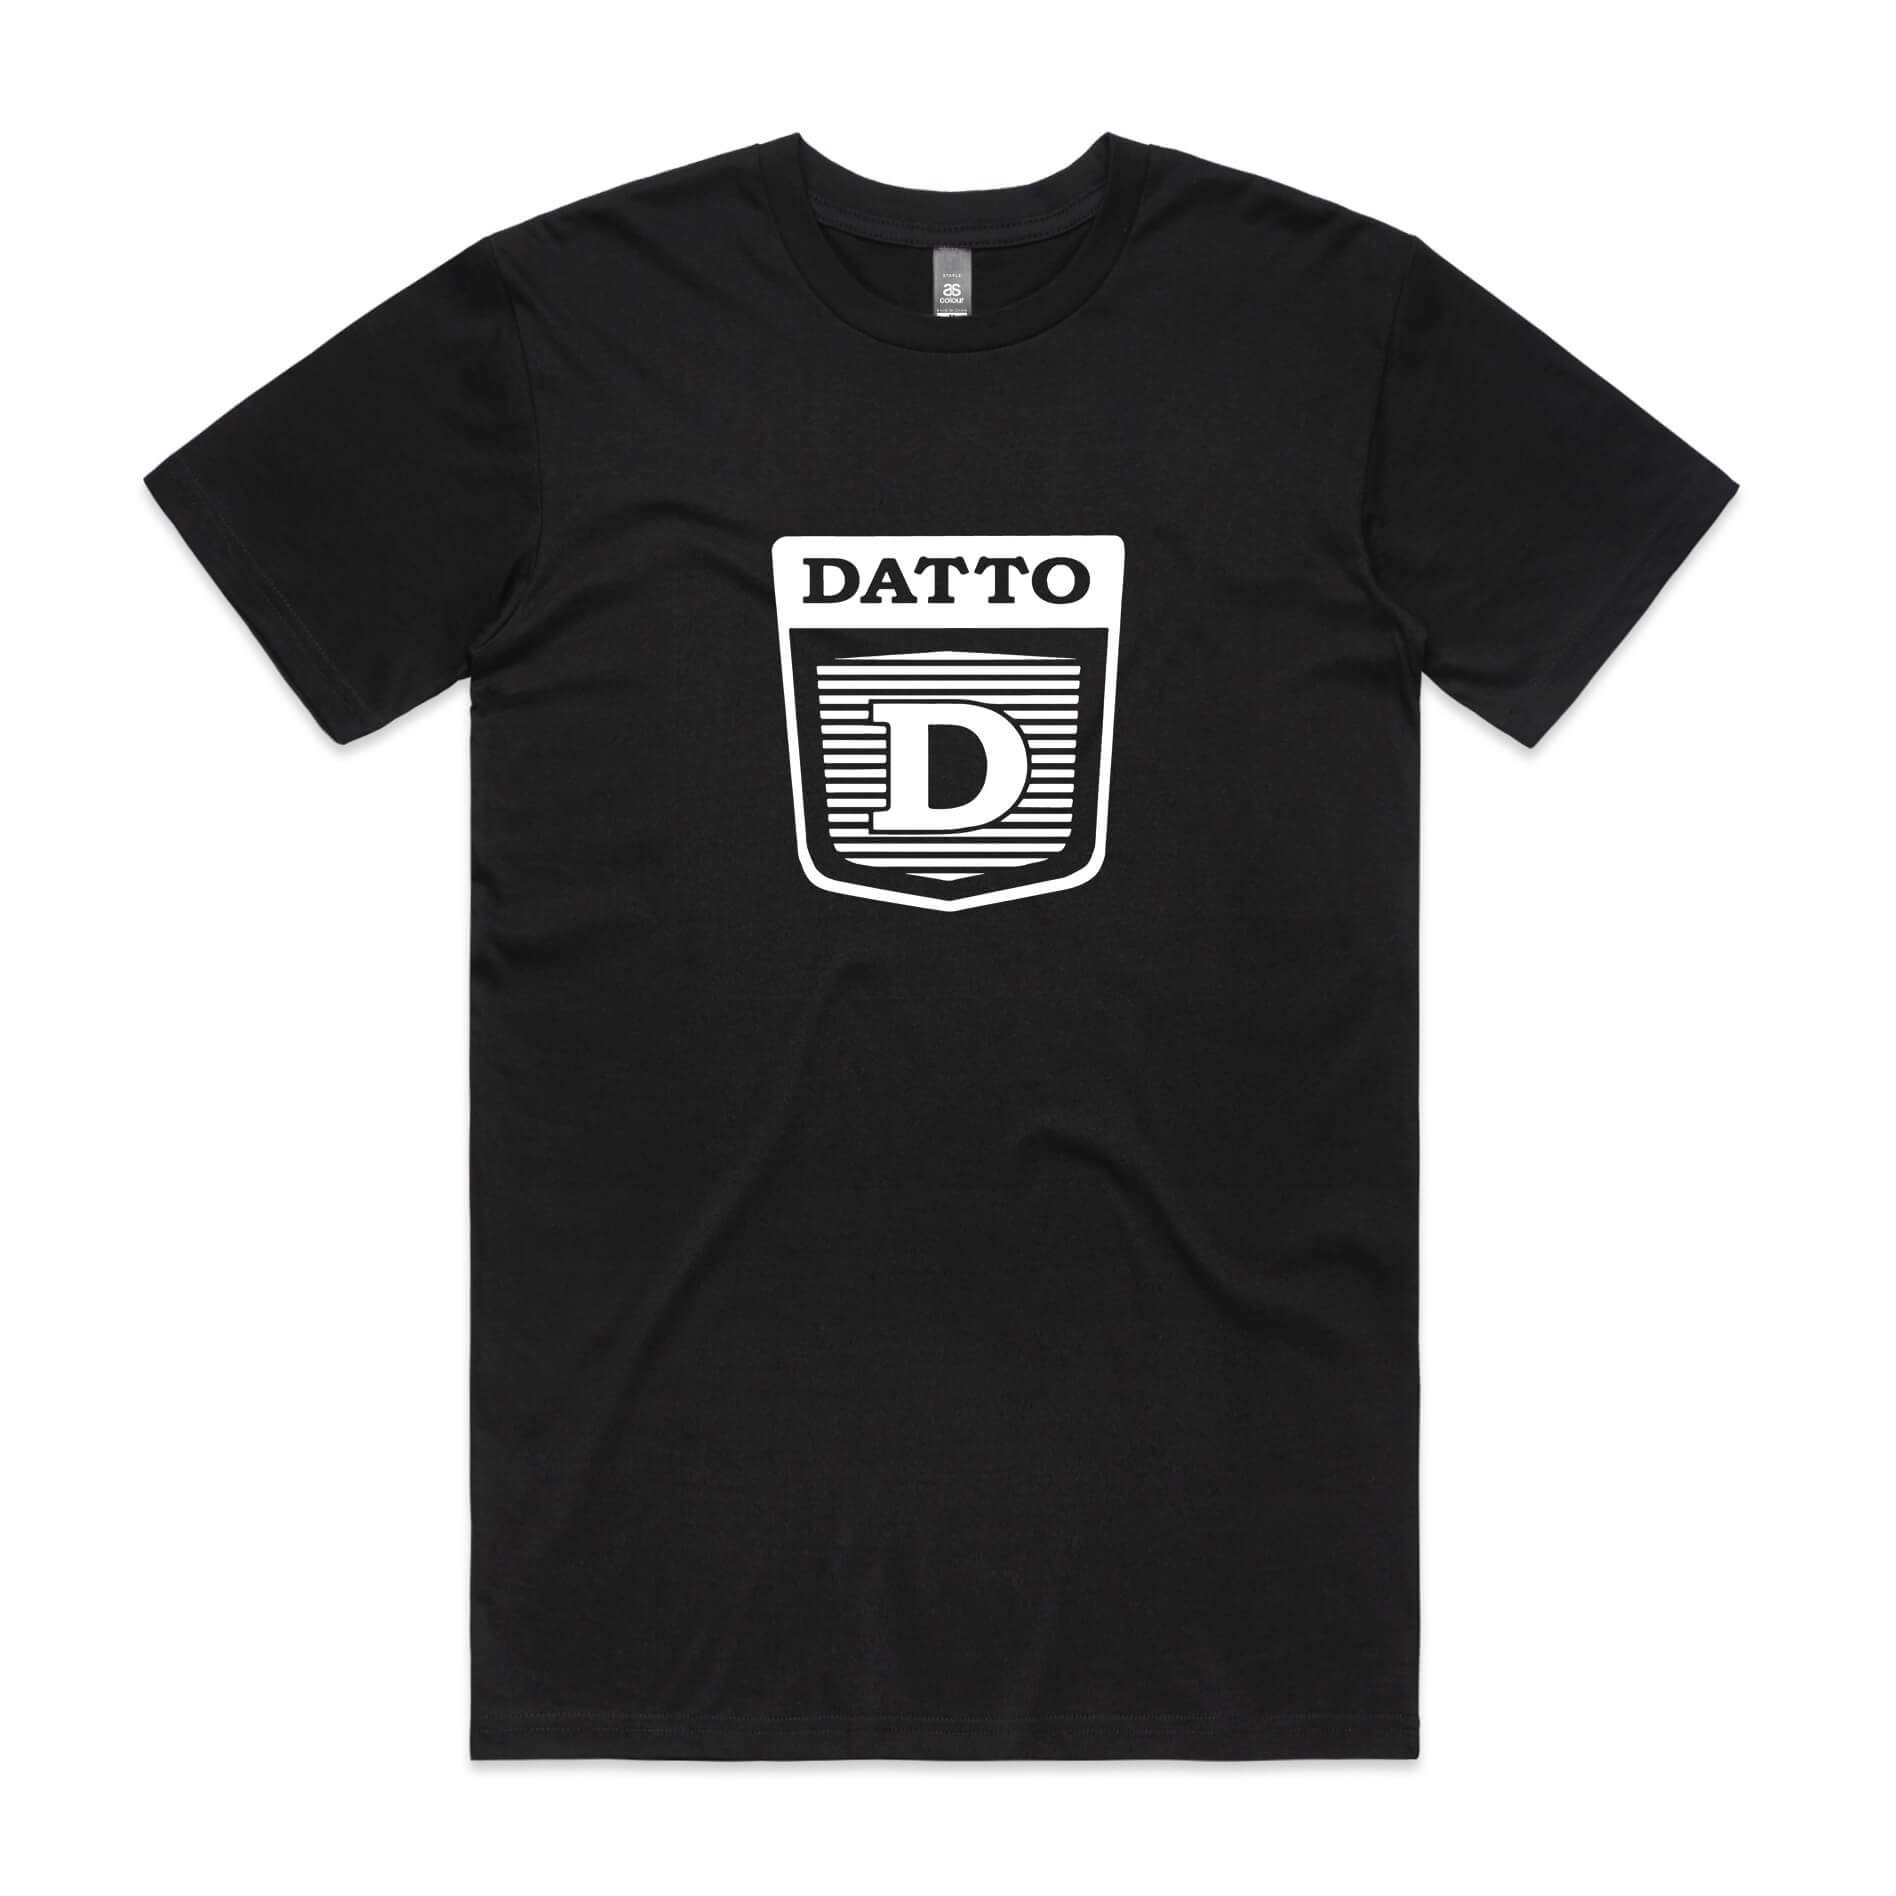 Datto t-shirt in black with white logo